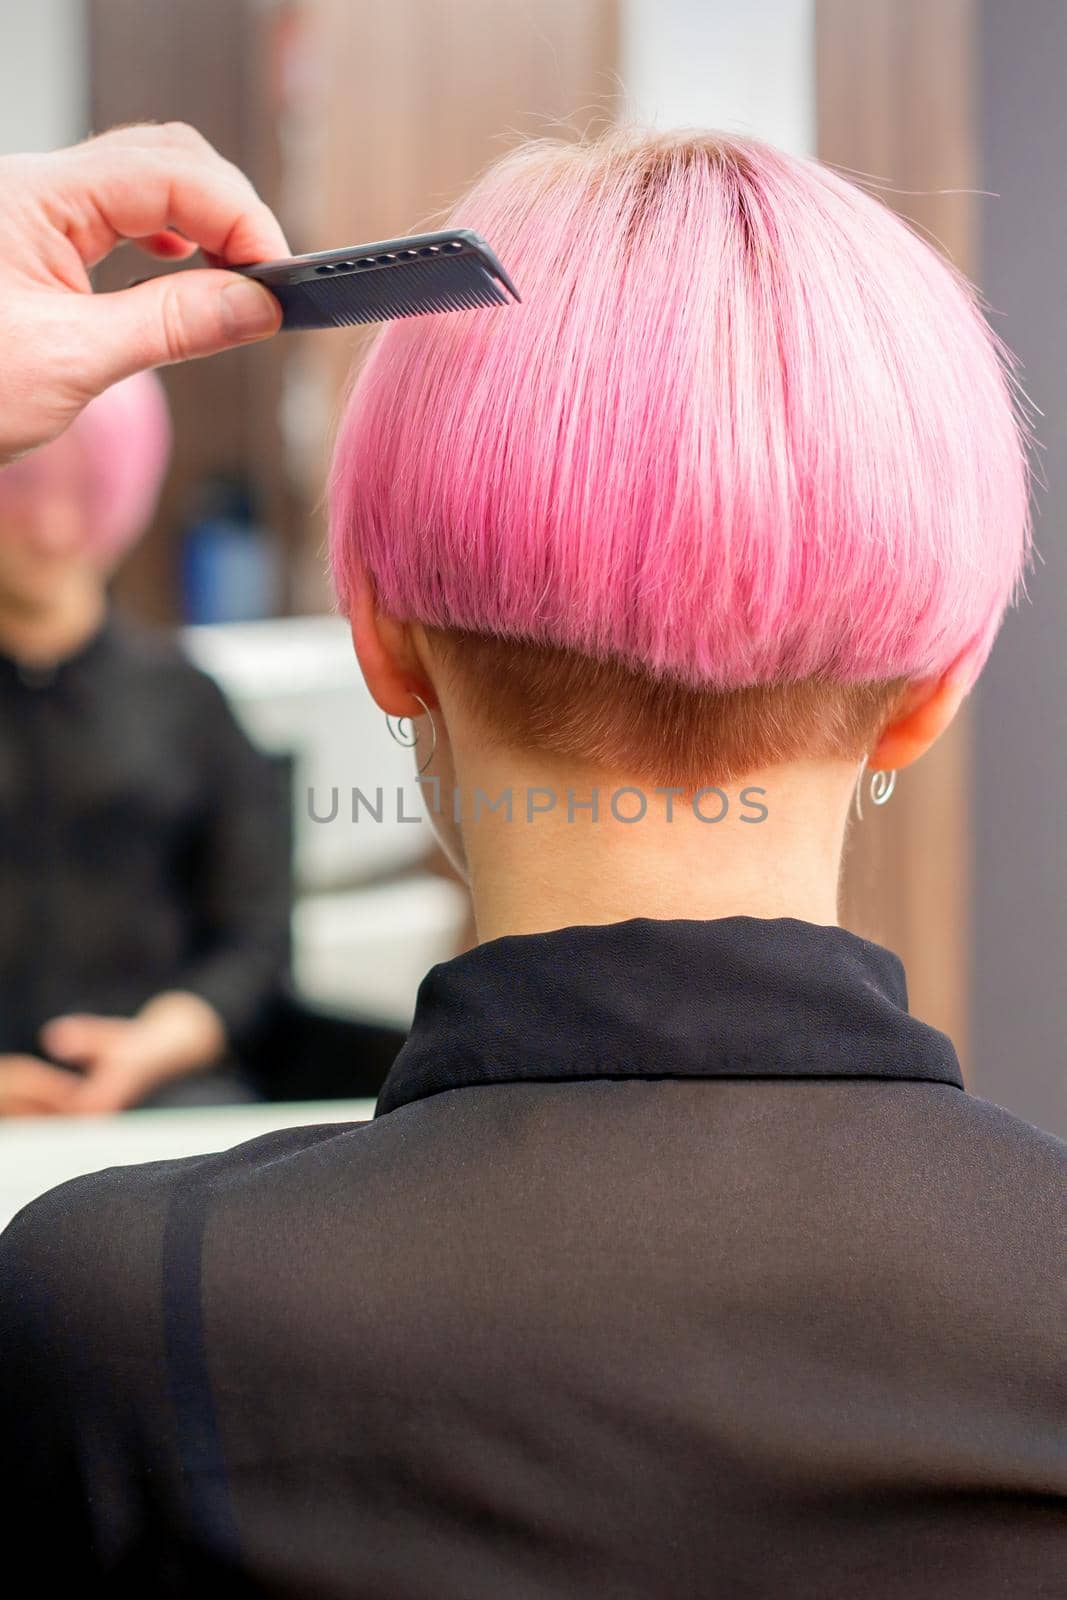 A hairdresser is combing the dyed pink short hair of the female client in hairdresser salon, back view. by okskukuruza